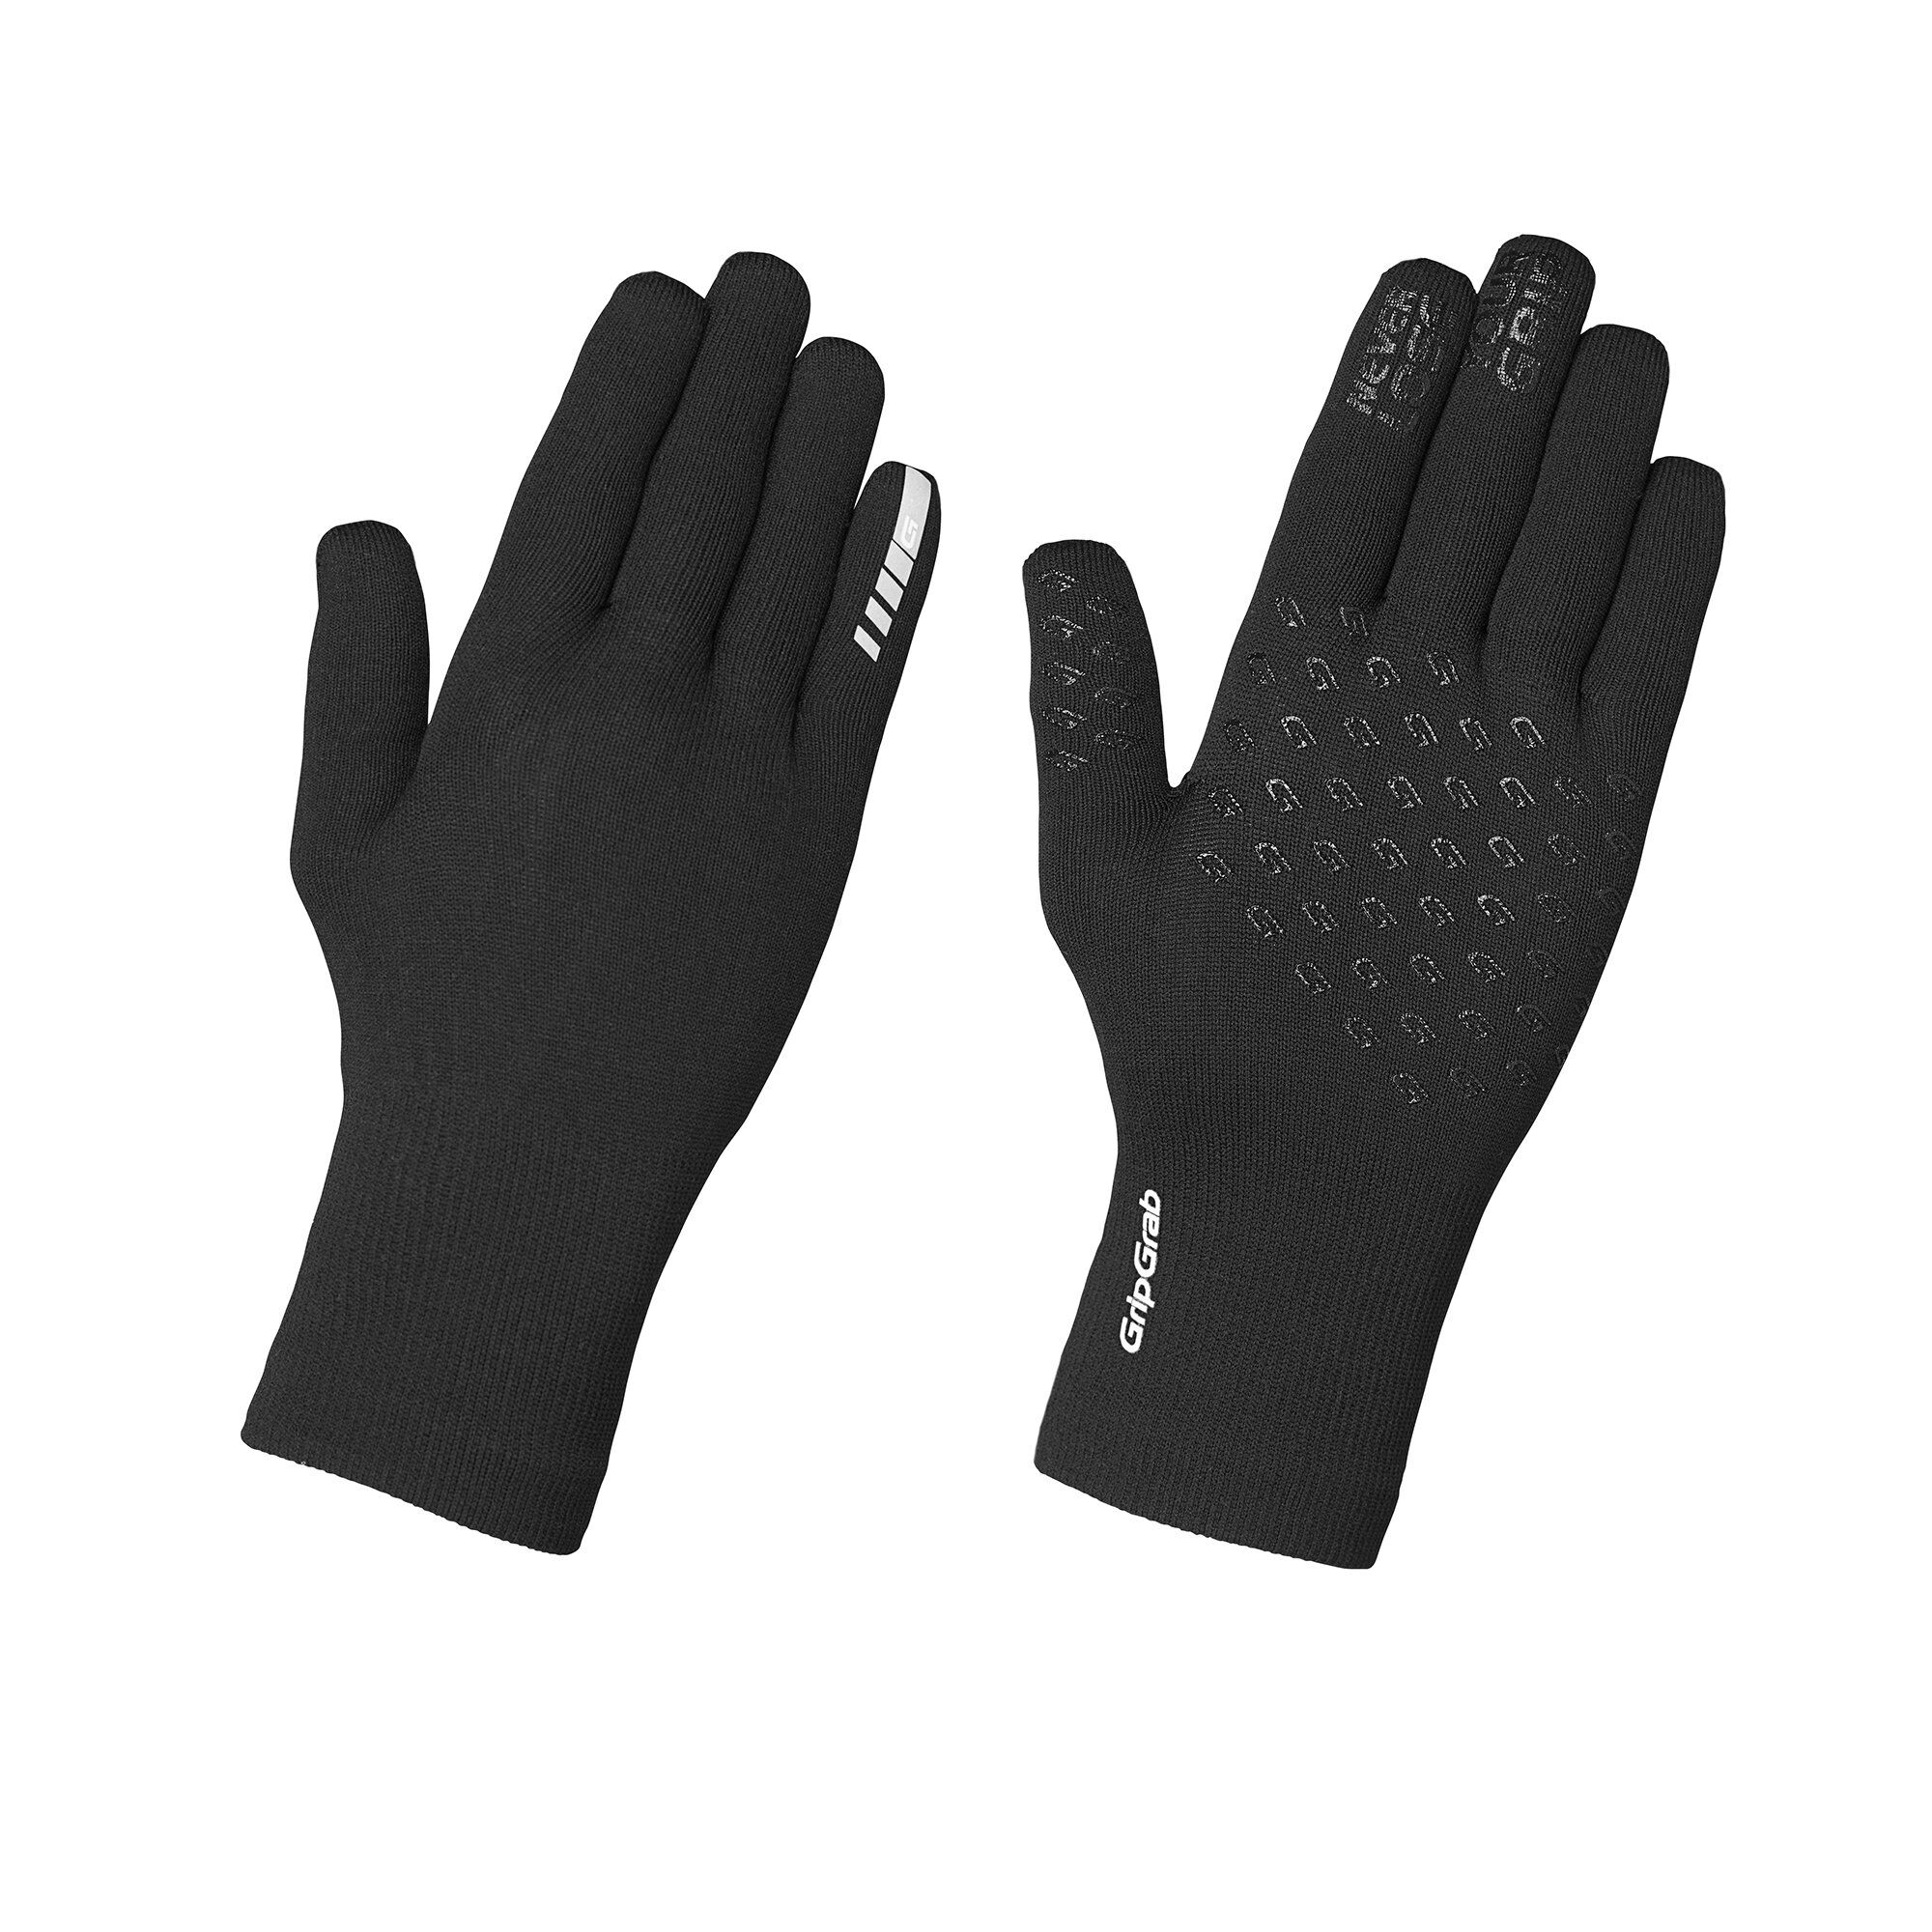 Grip Grab Waterproof Knitted Thermal Glove - Guanti ciclismo